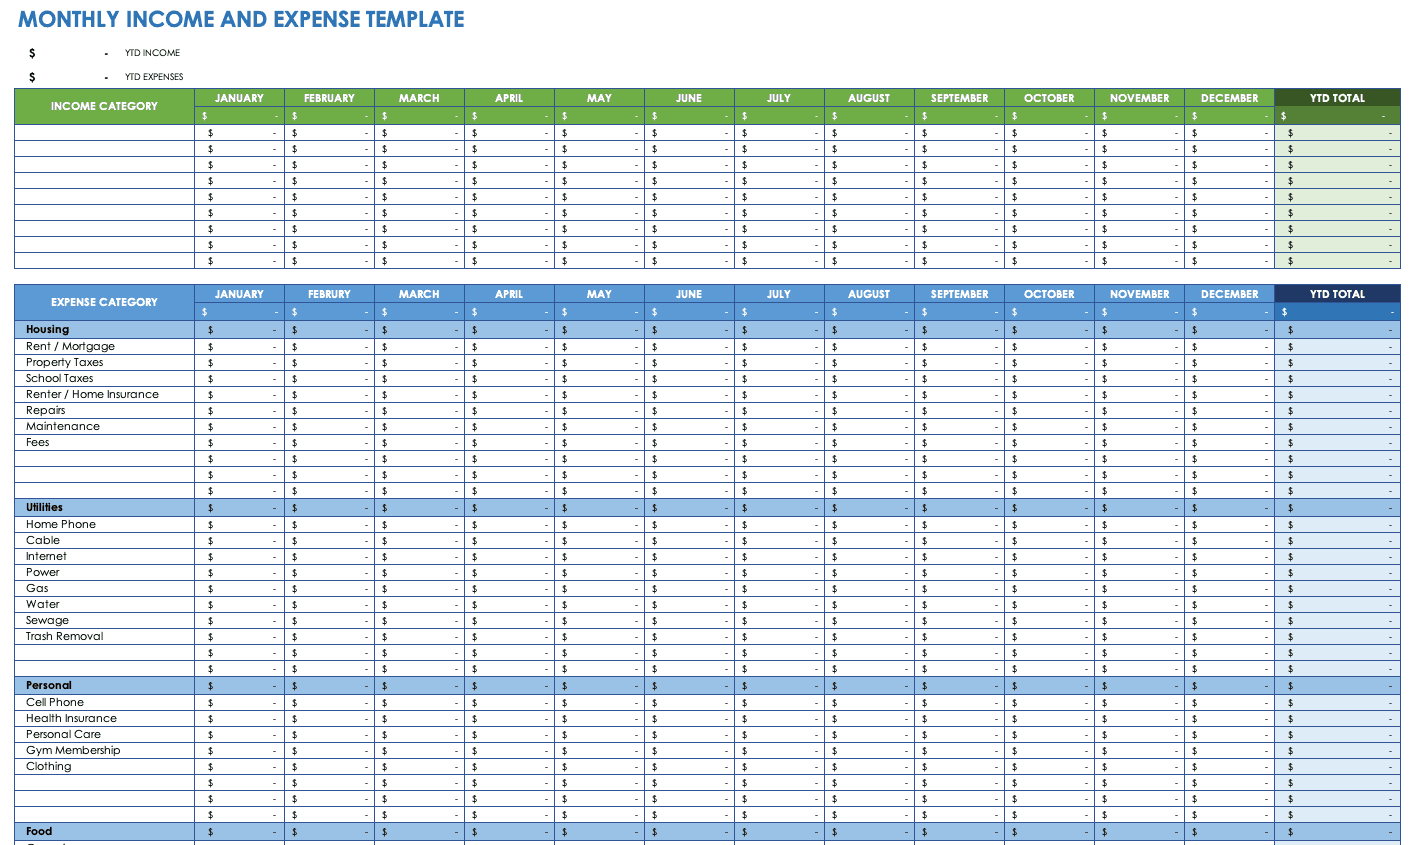 excel business expense tracker